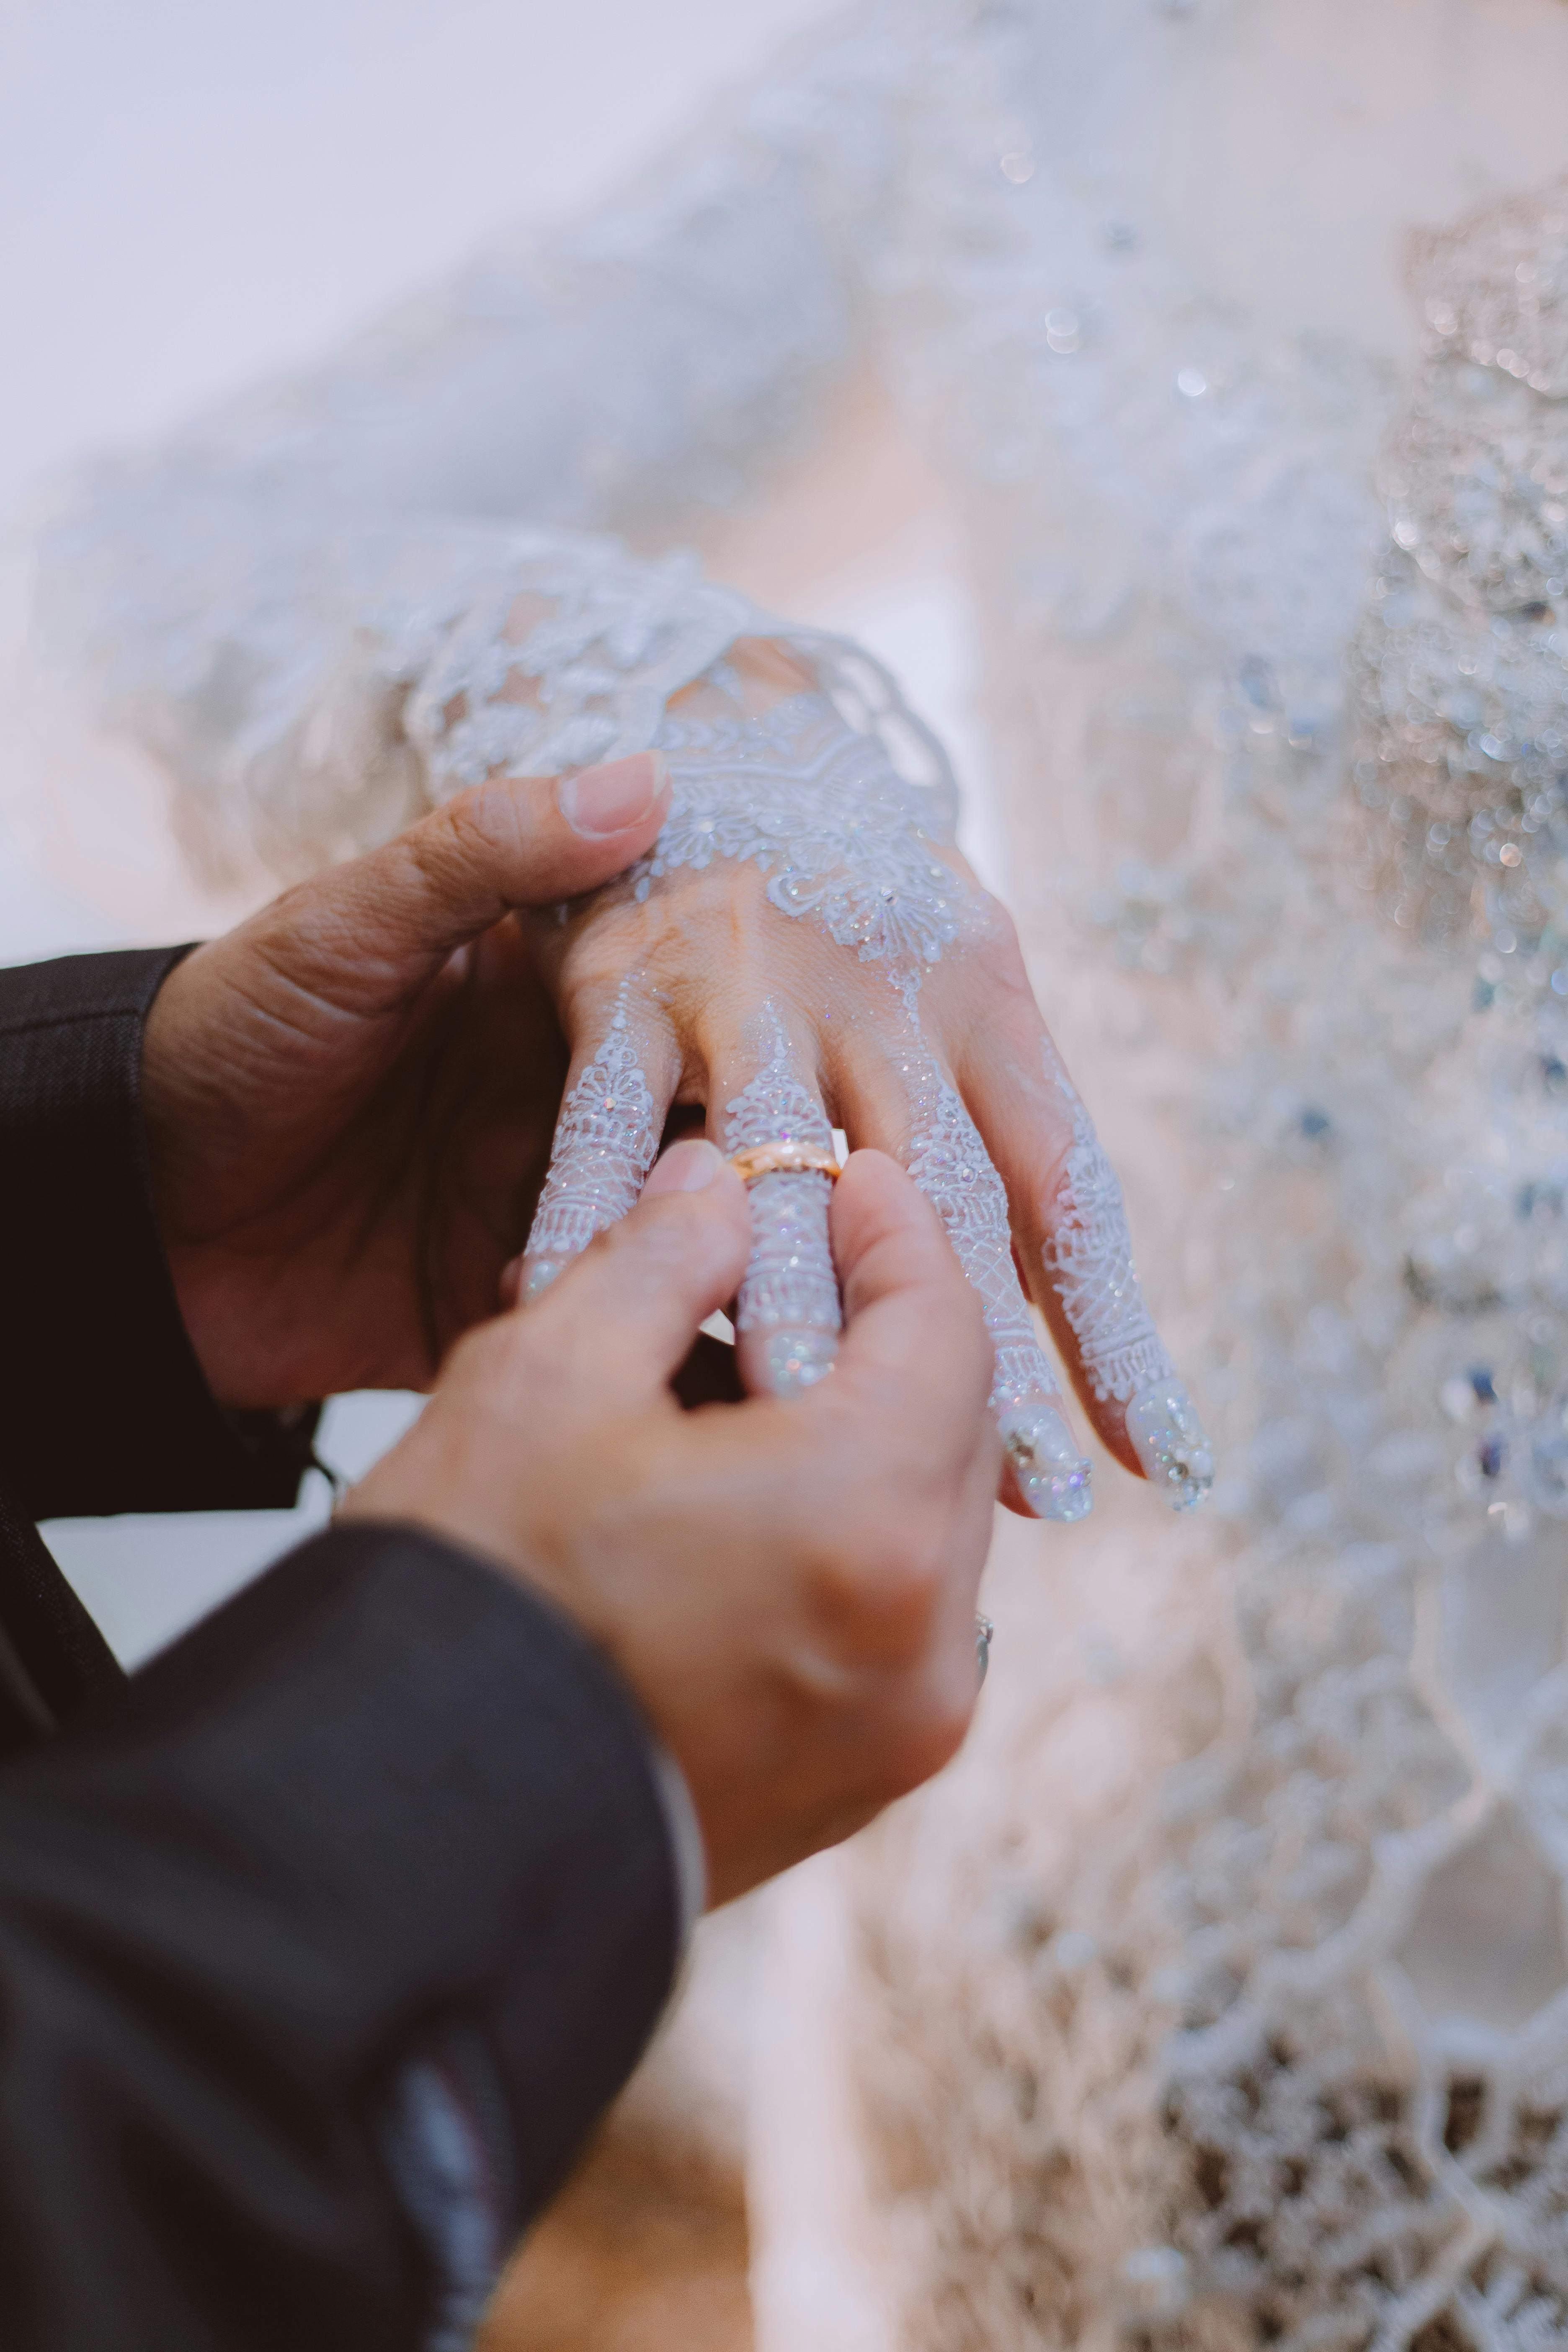 Does the Bride and Groom Need Matching Wedding Rings?